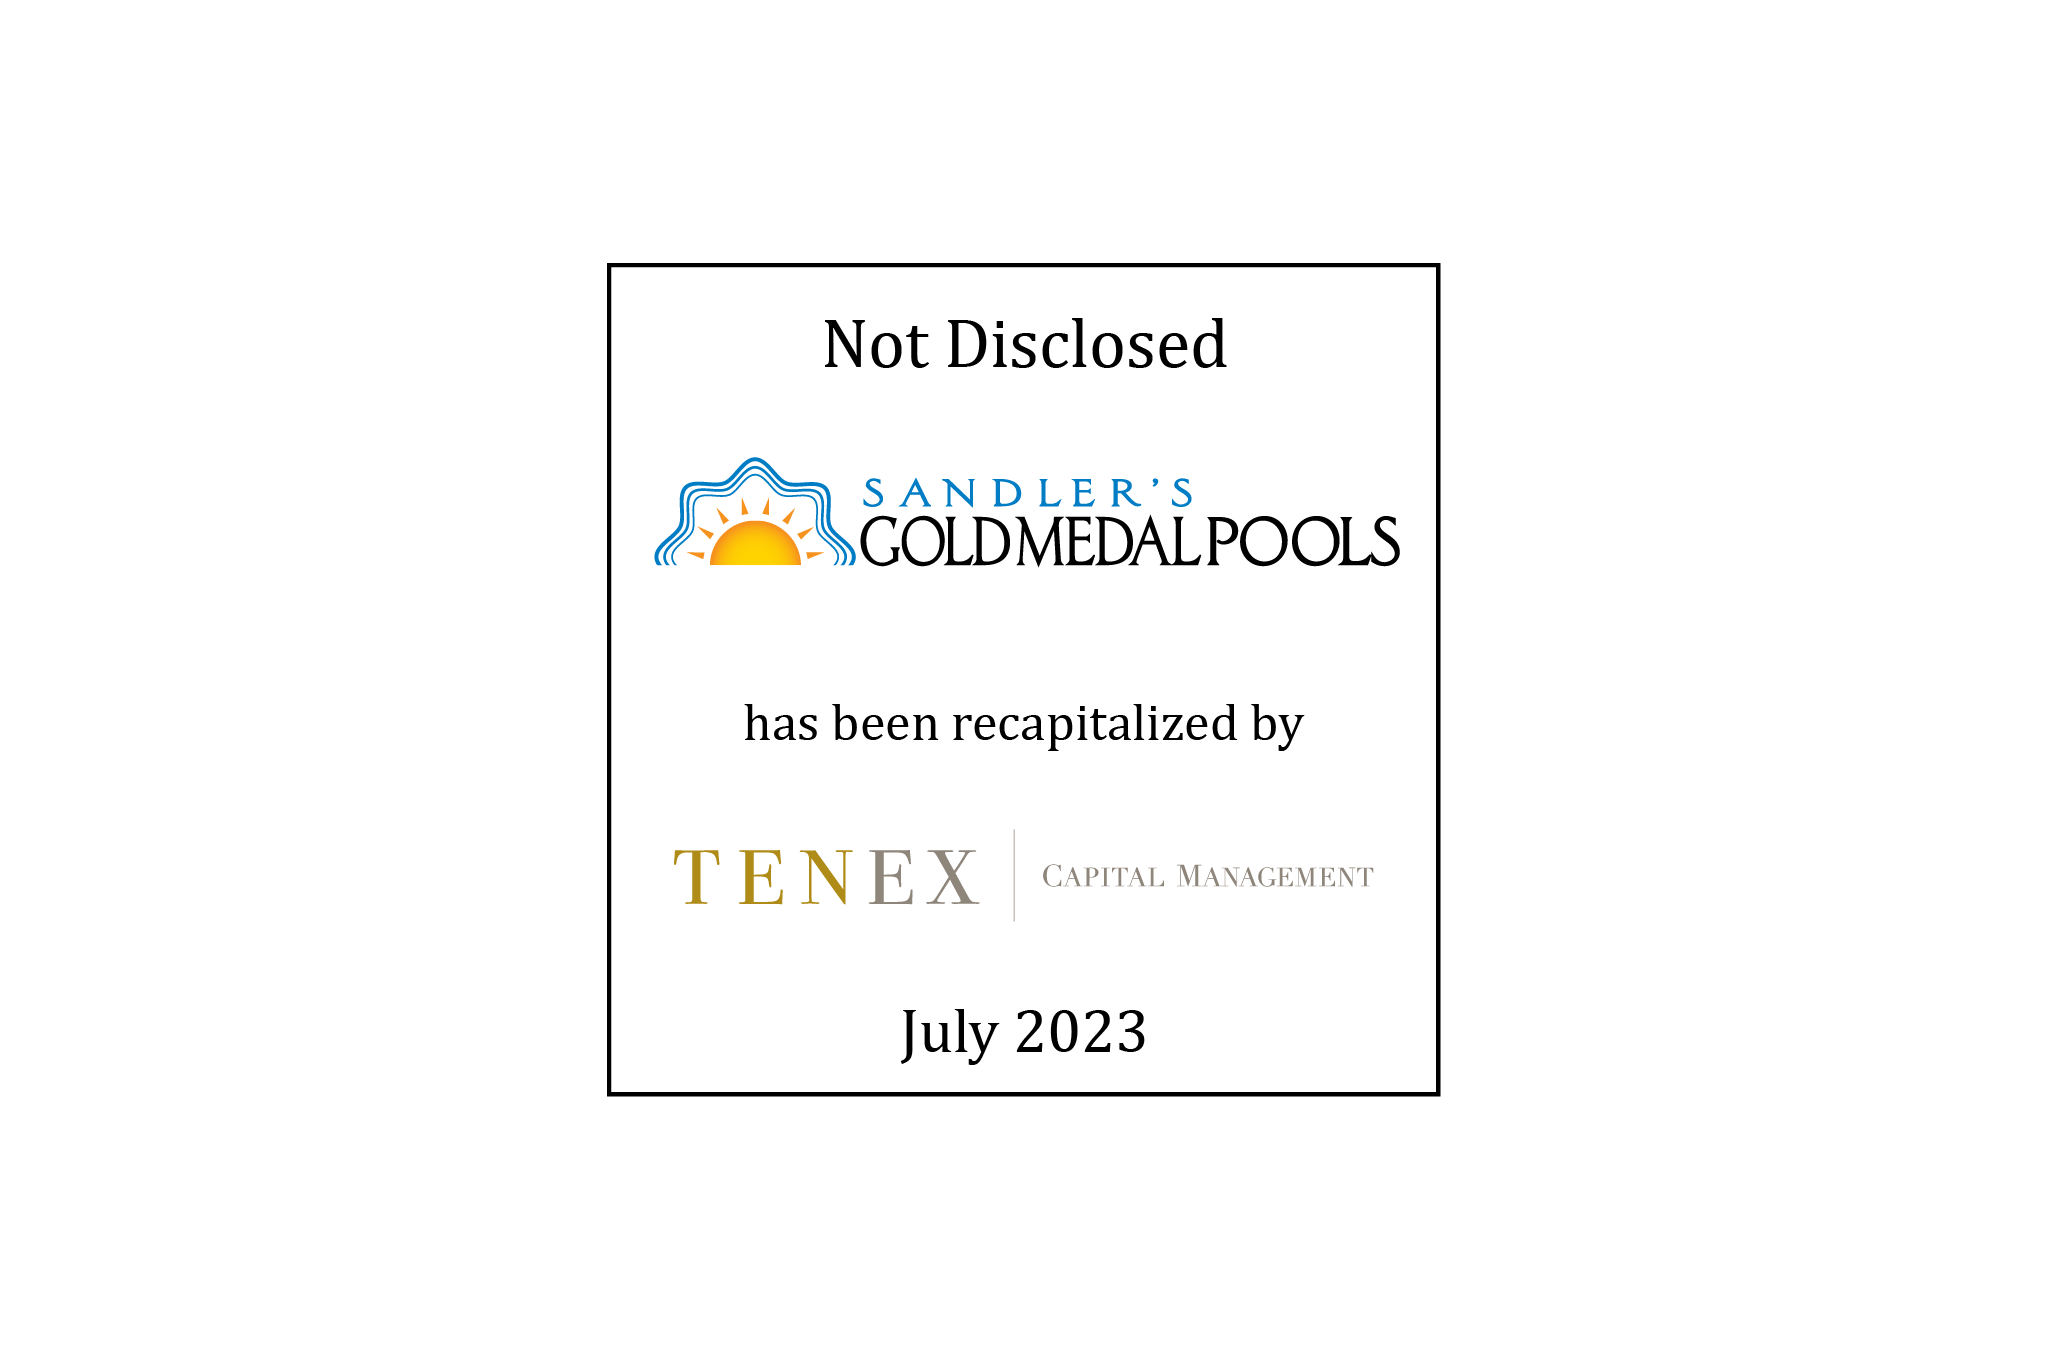 Not Disclosed | Gold Medal Pools (logo) has been recapitalized by Tenex Capital Management (logo) | July 2023 